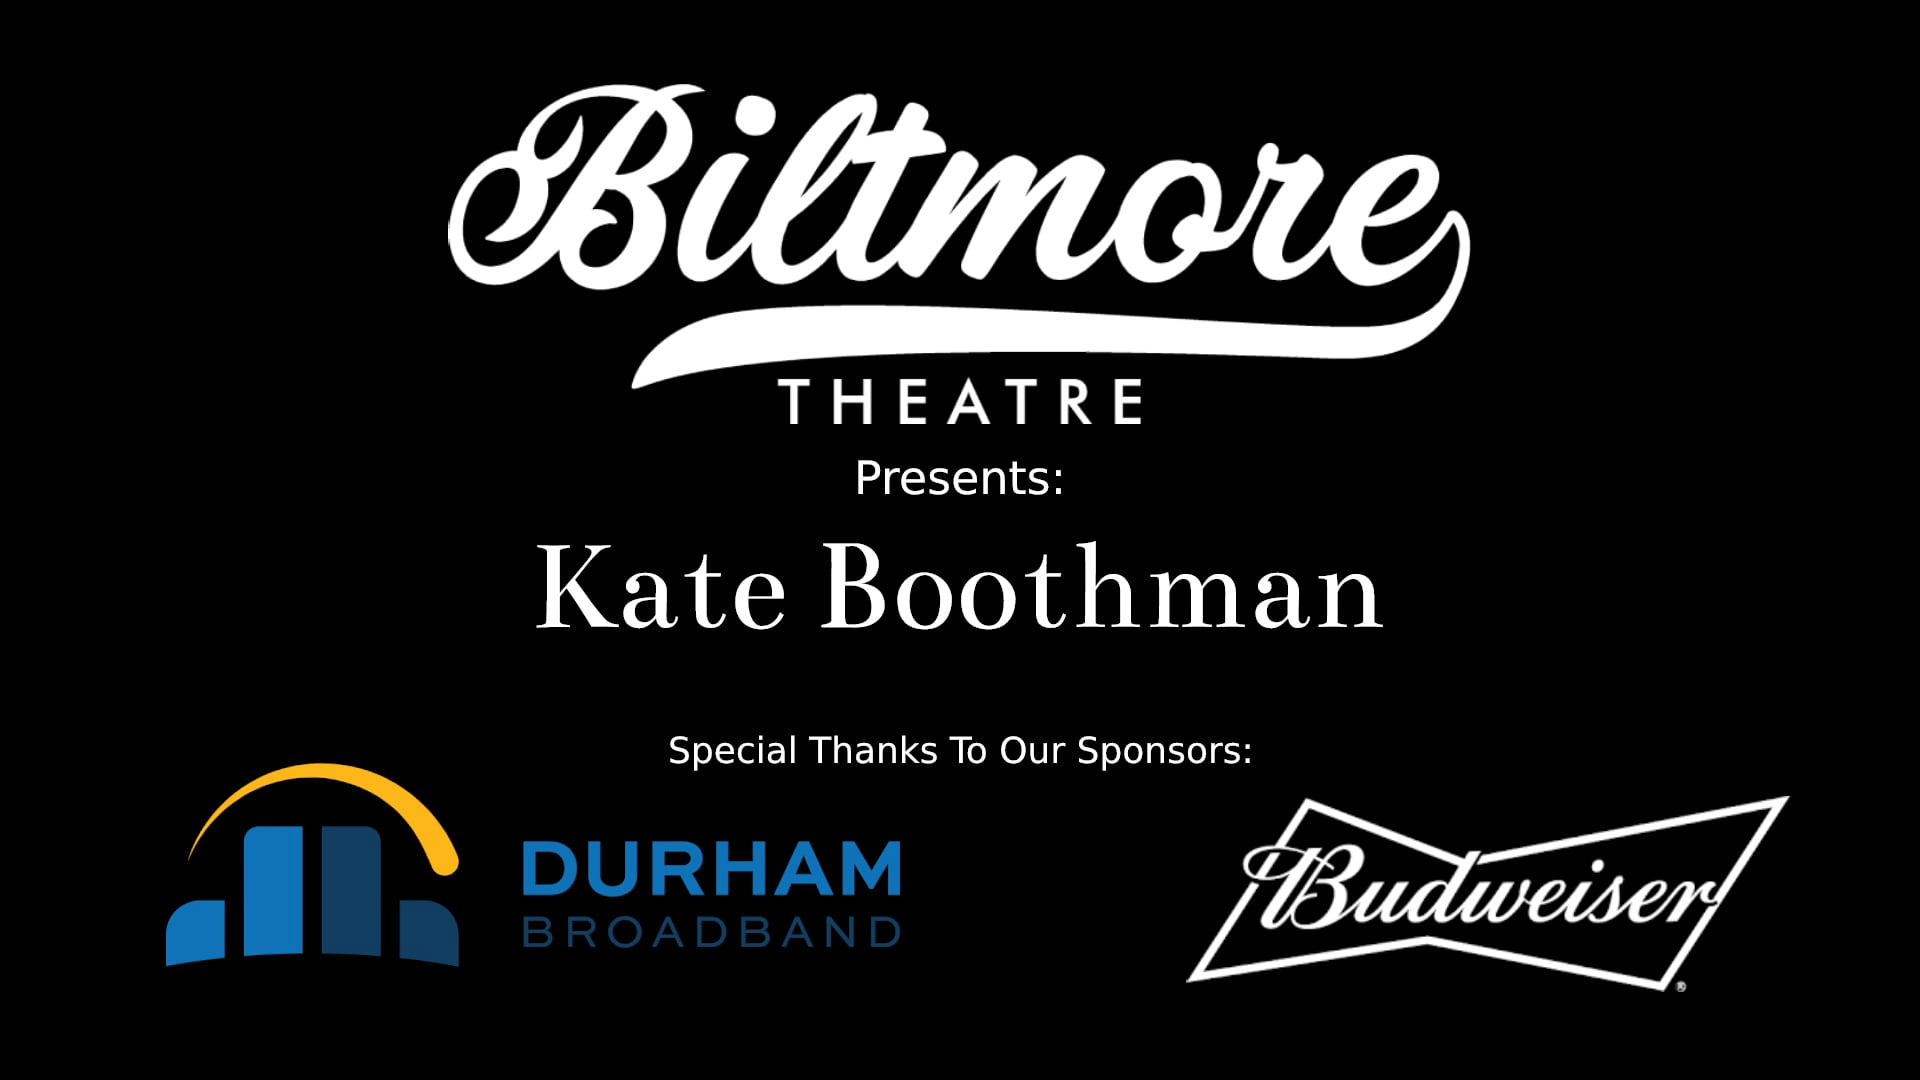 The Biltmore Theatre Presents Kate Boothman